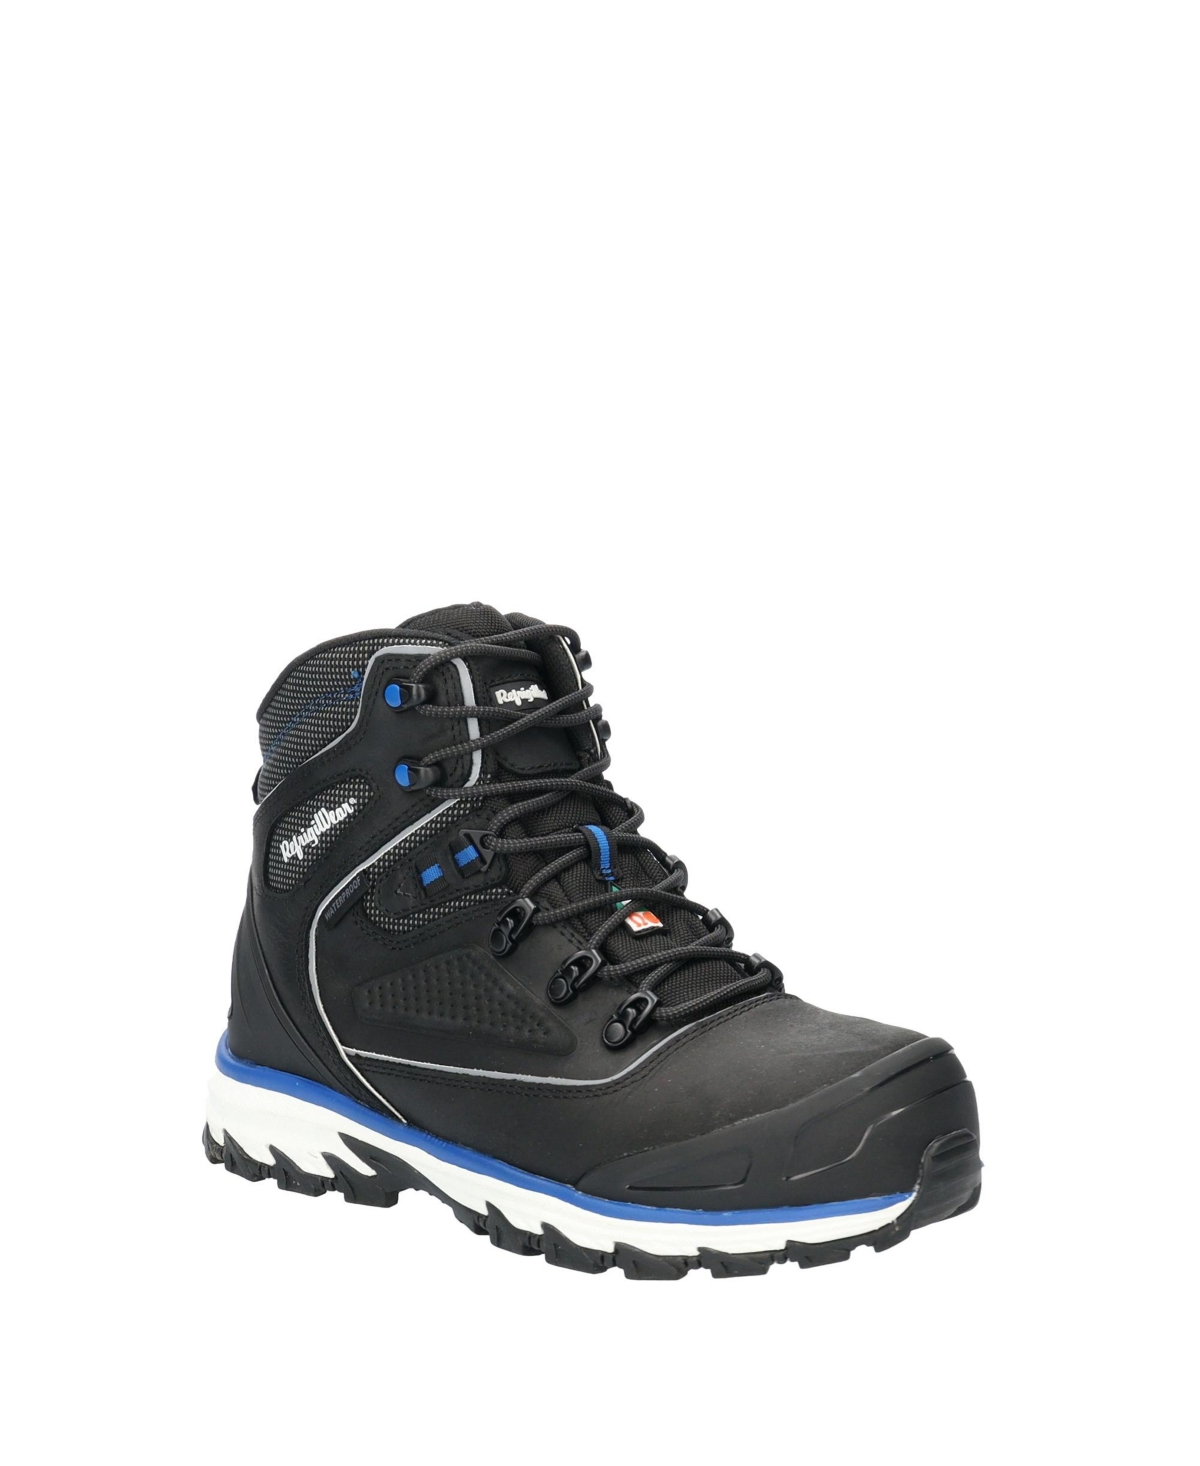 Men's Permafrost Hiker, Insulated Waterproof Leather Work Boots - Black